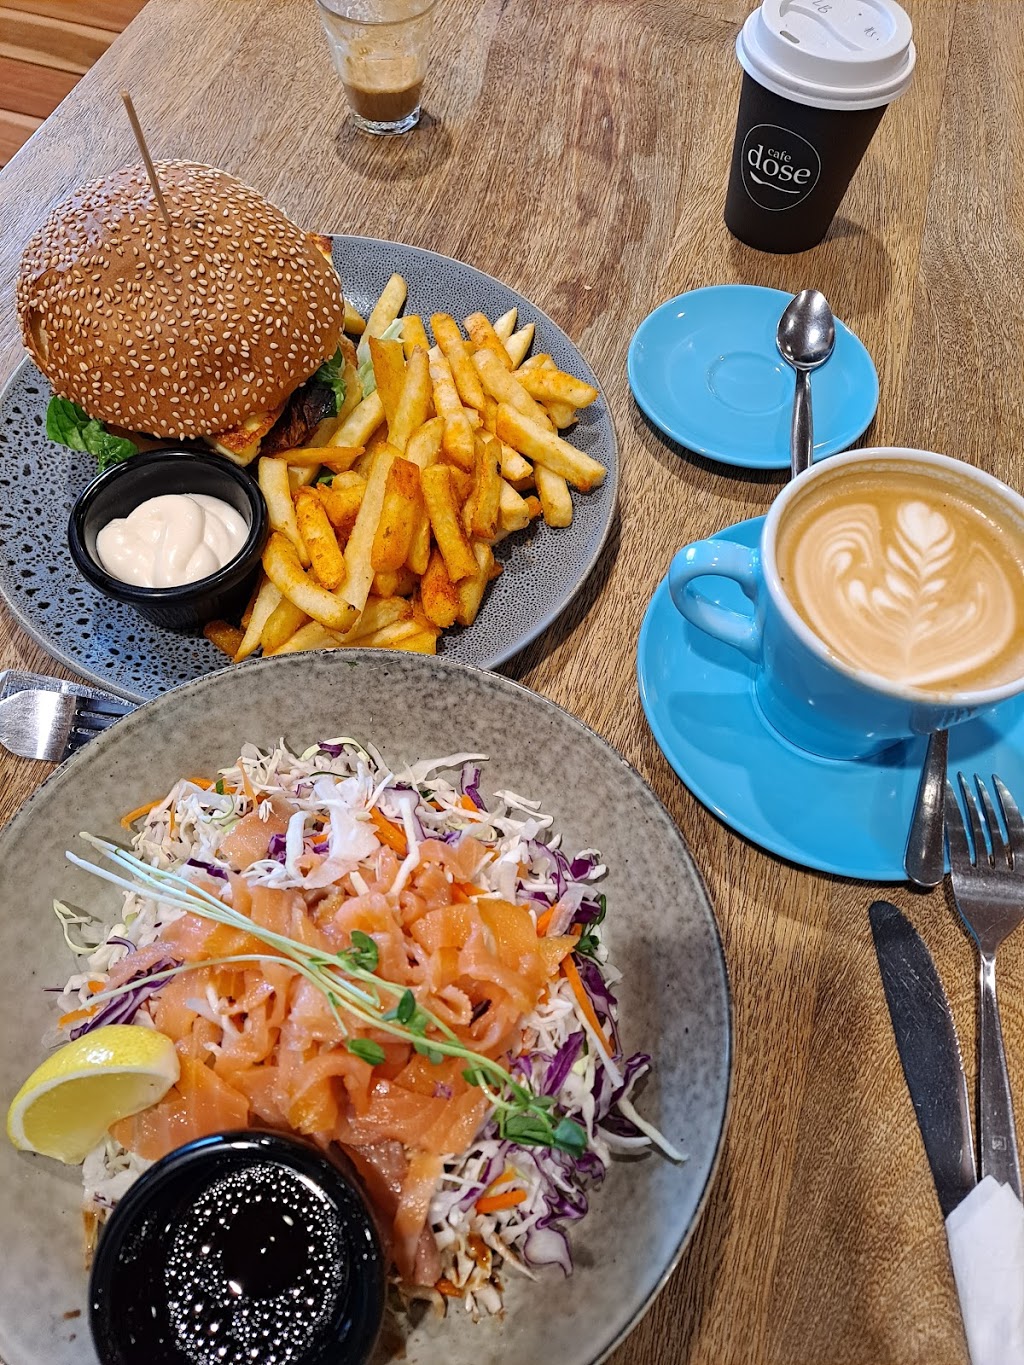 Cafe Dose | cafe | 288 Herston Rd, Herston QLD 4006, Australia | 0429069988 OR +61 429 069 988